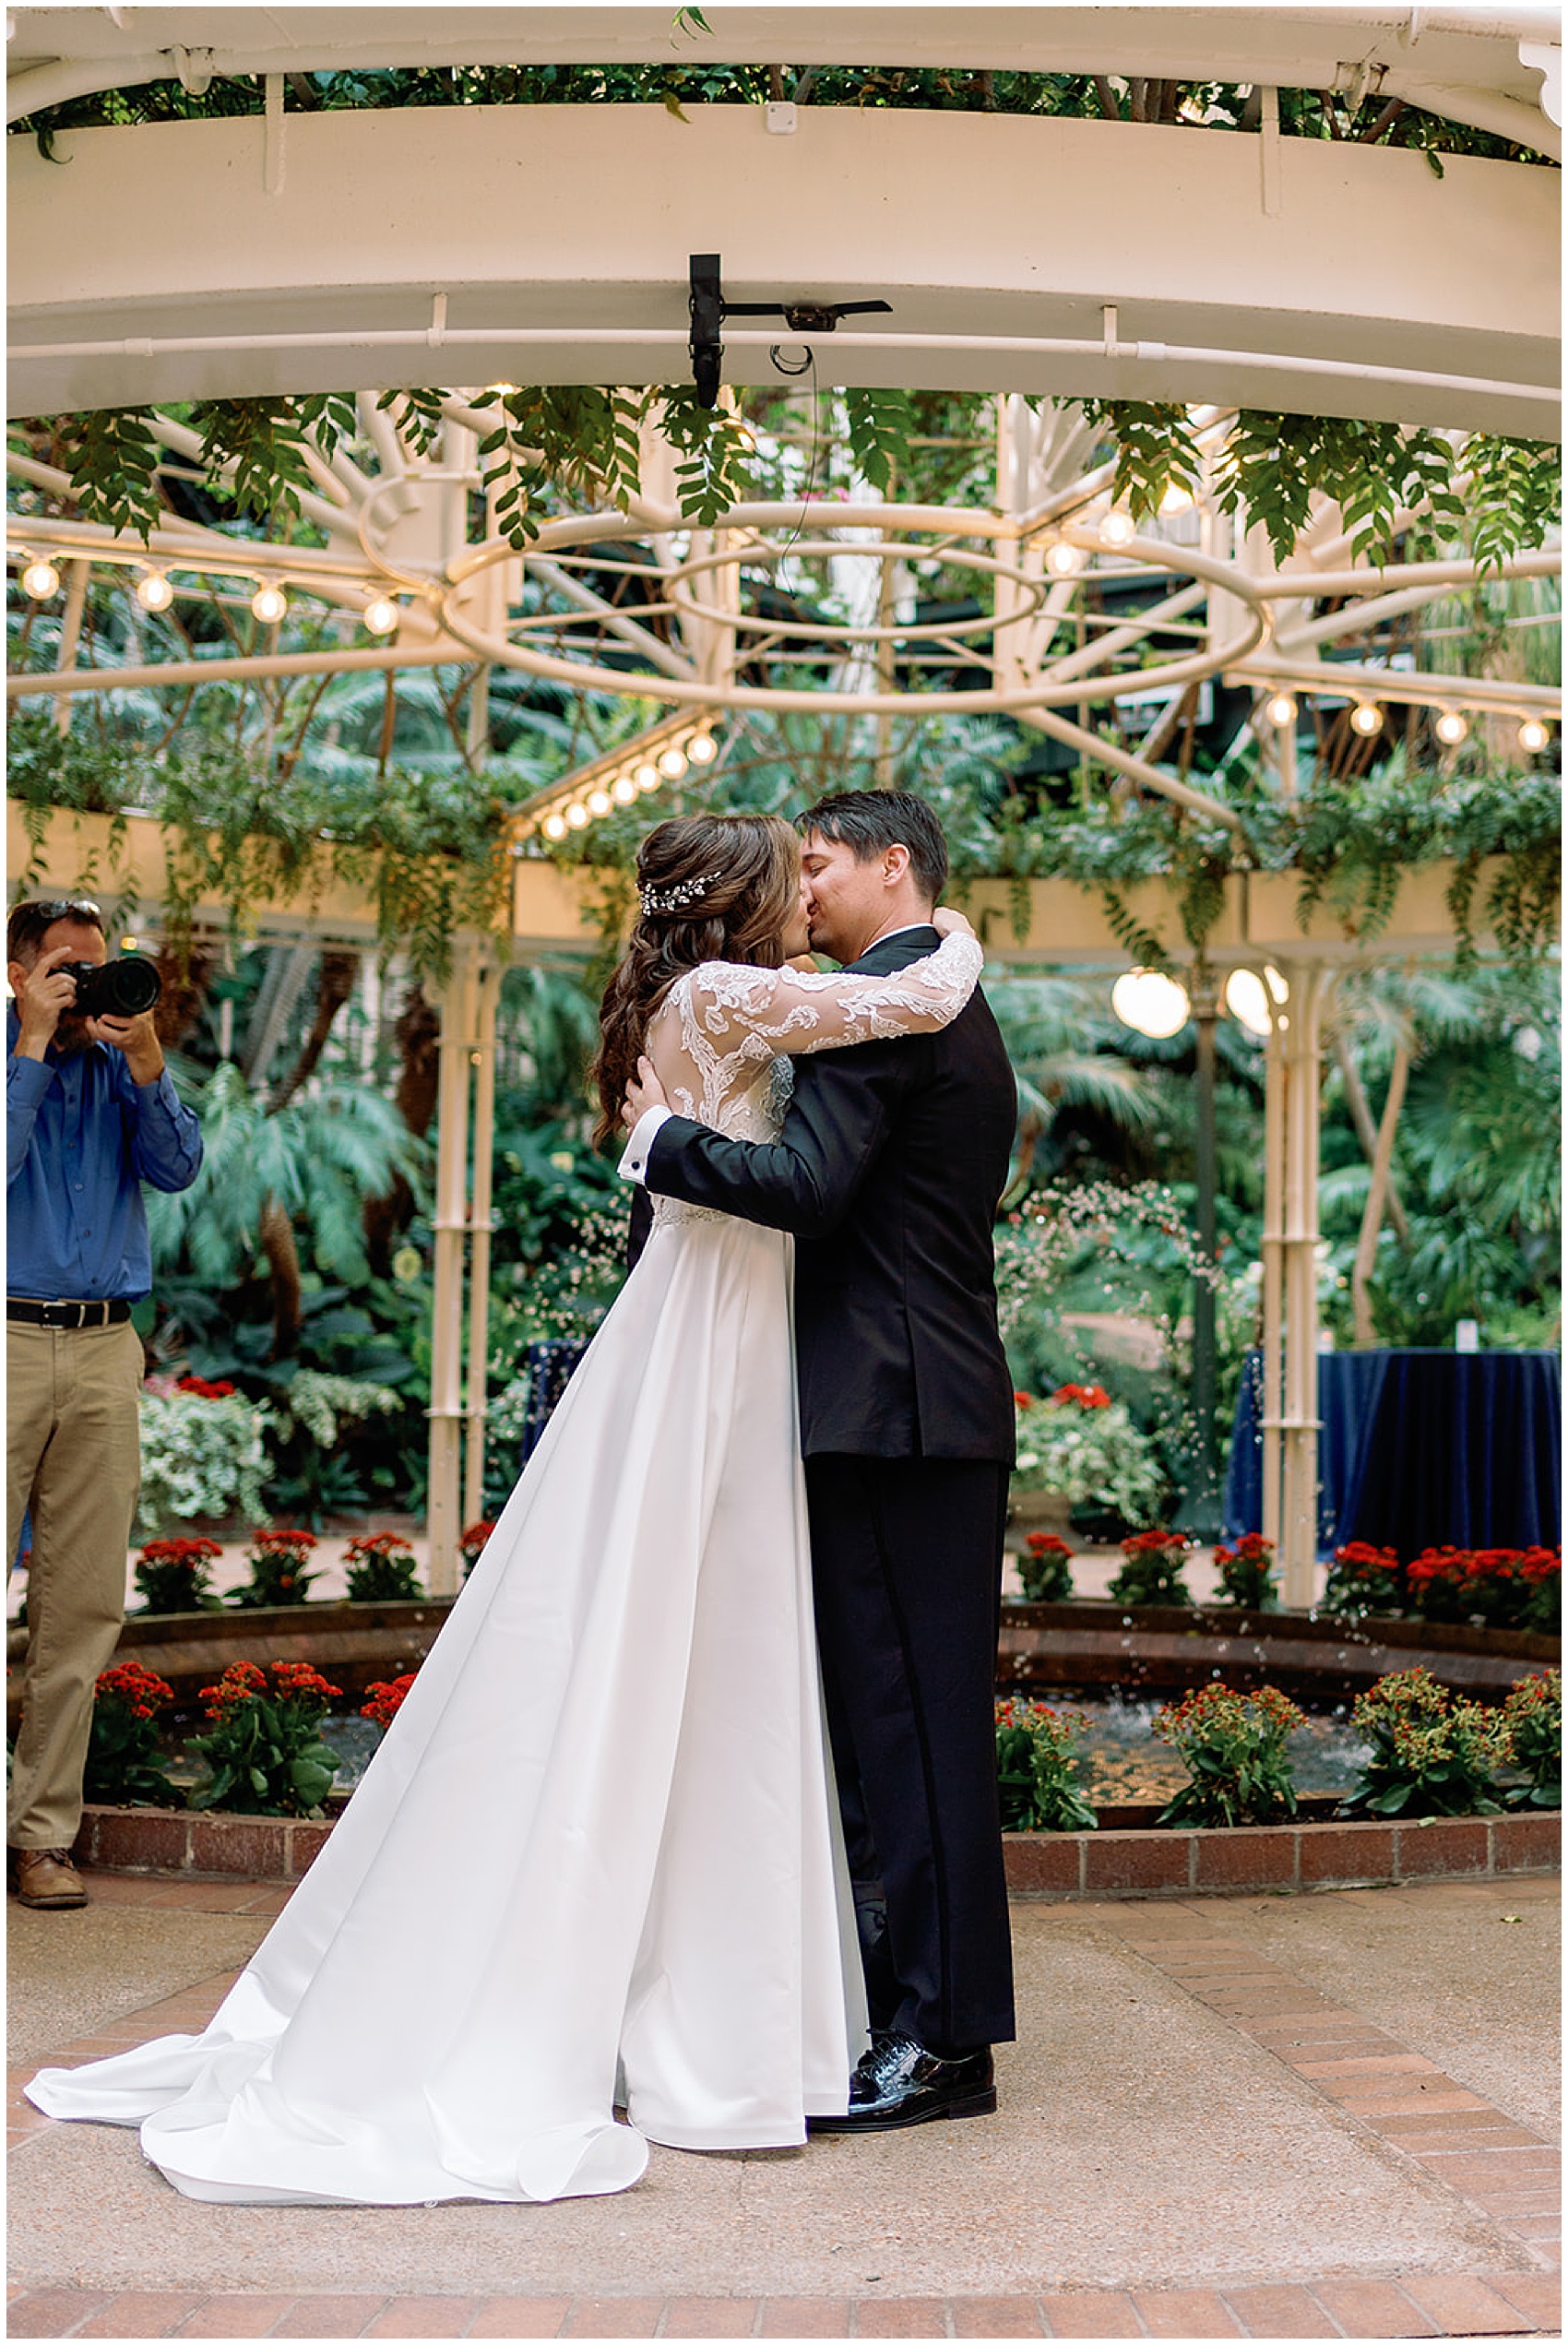 Newlyweds kiss while standing in a garden